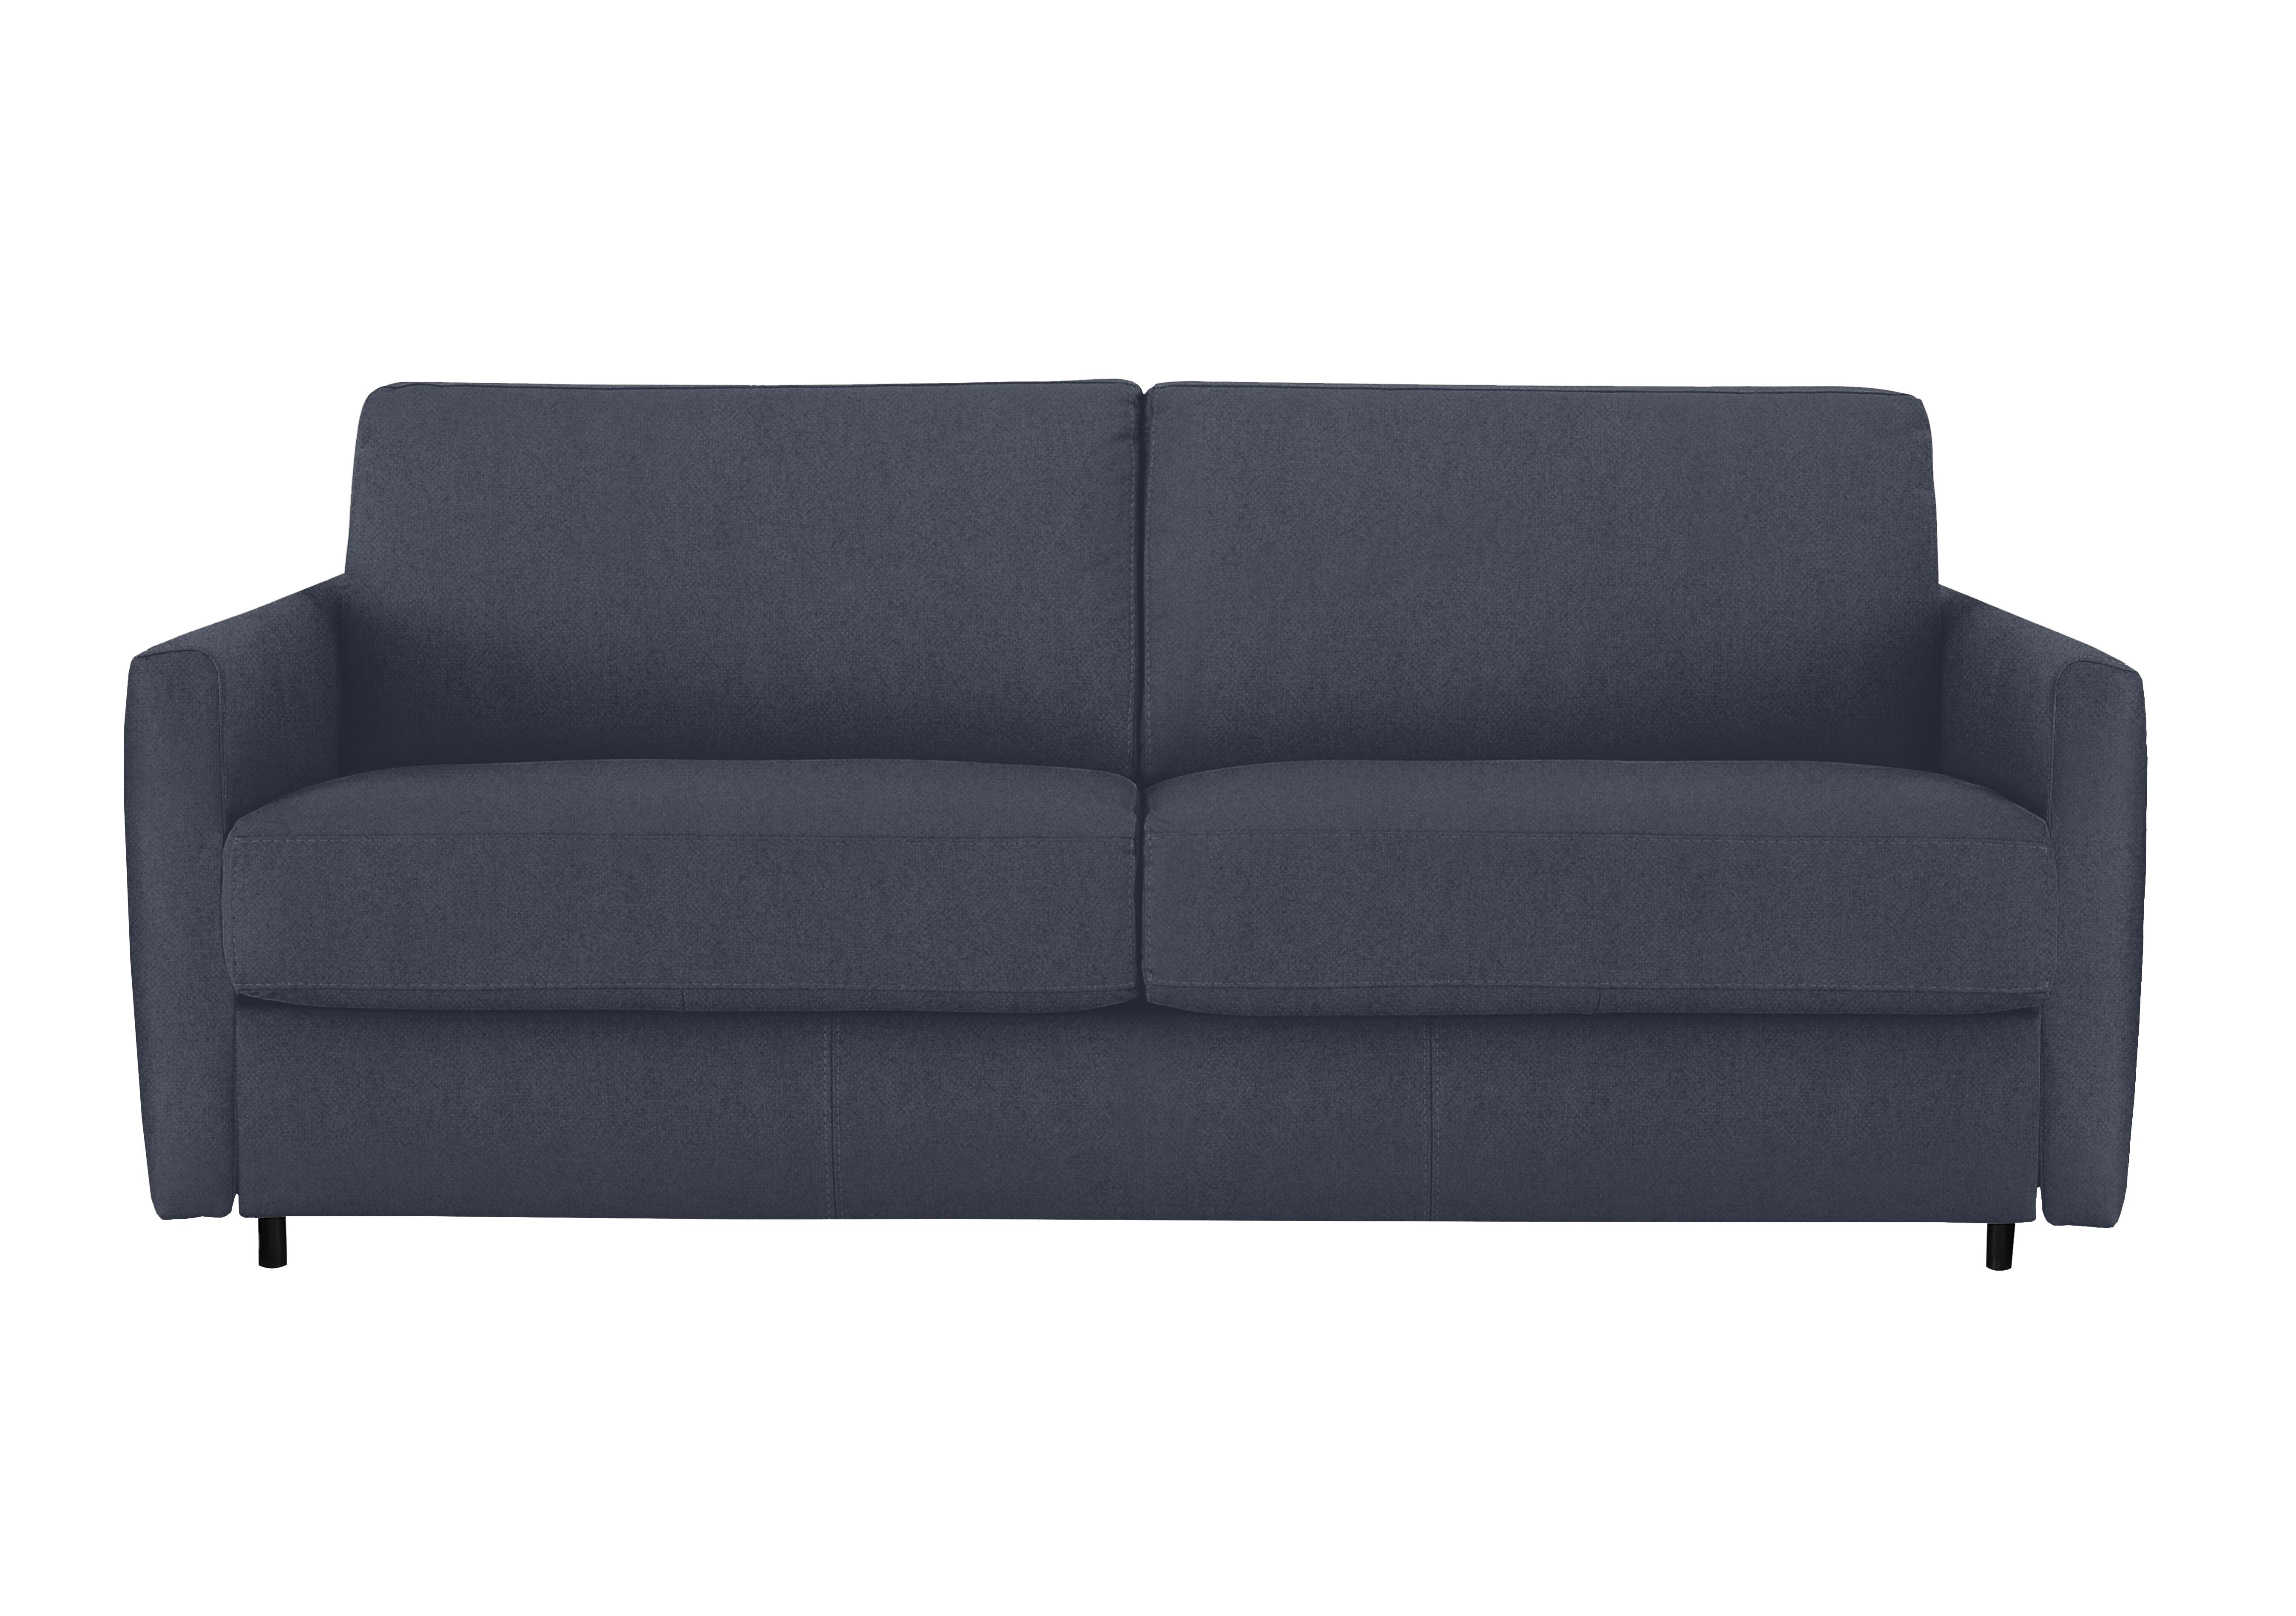 Alcova 3 Seater Fabric Sofa Bed with Slim Arms in Fuente Ocean on Furniture Village